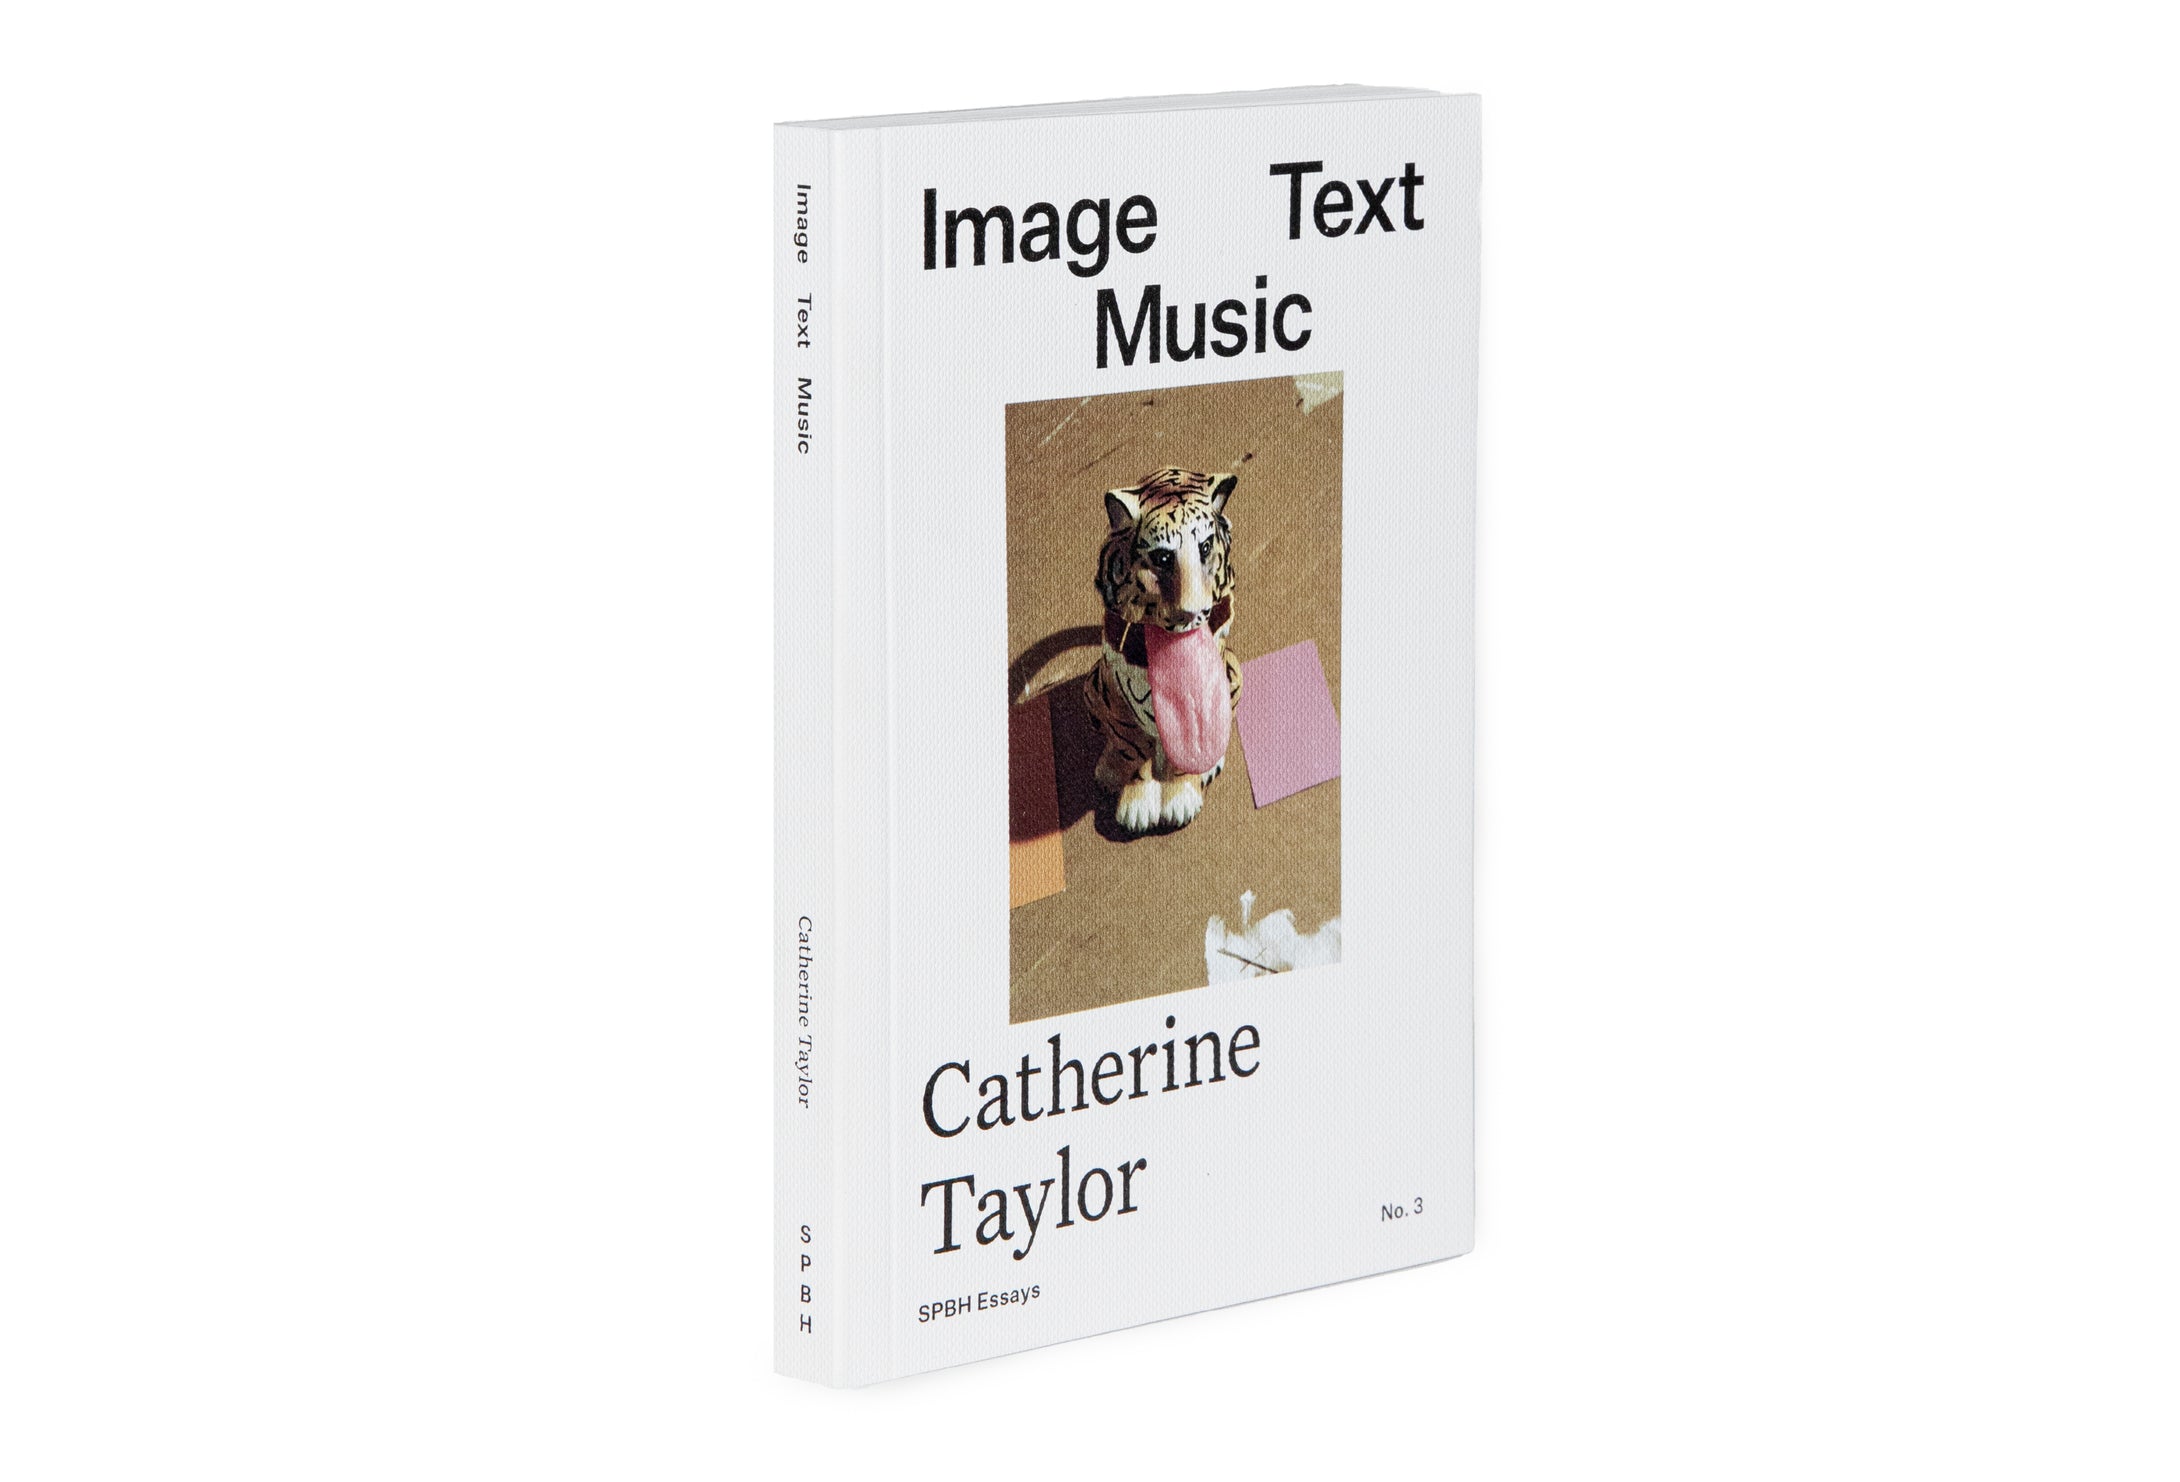 Image Text Music by Catherine Taylor